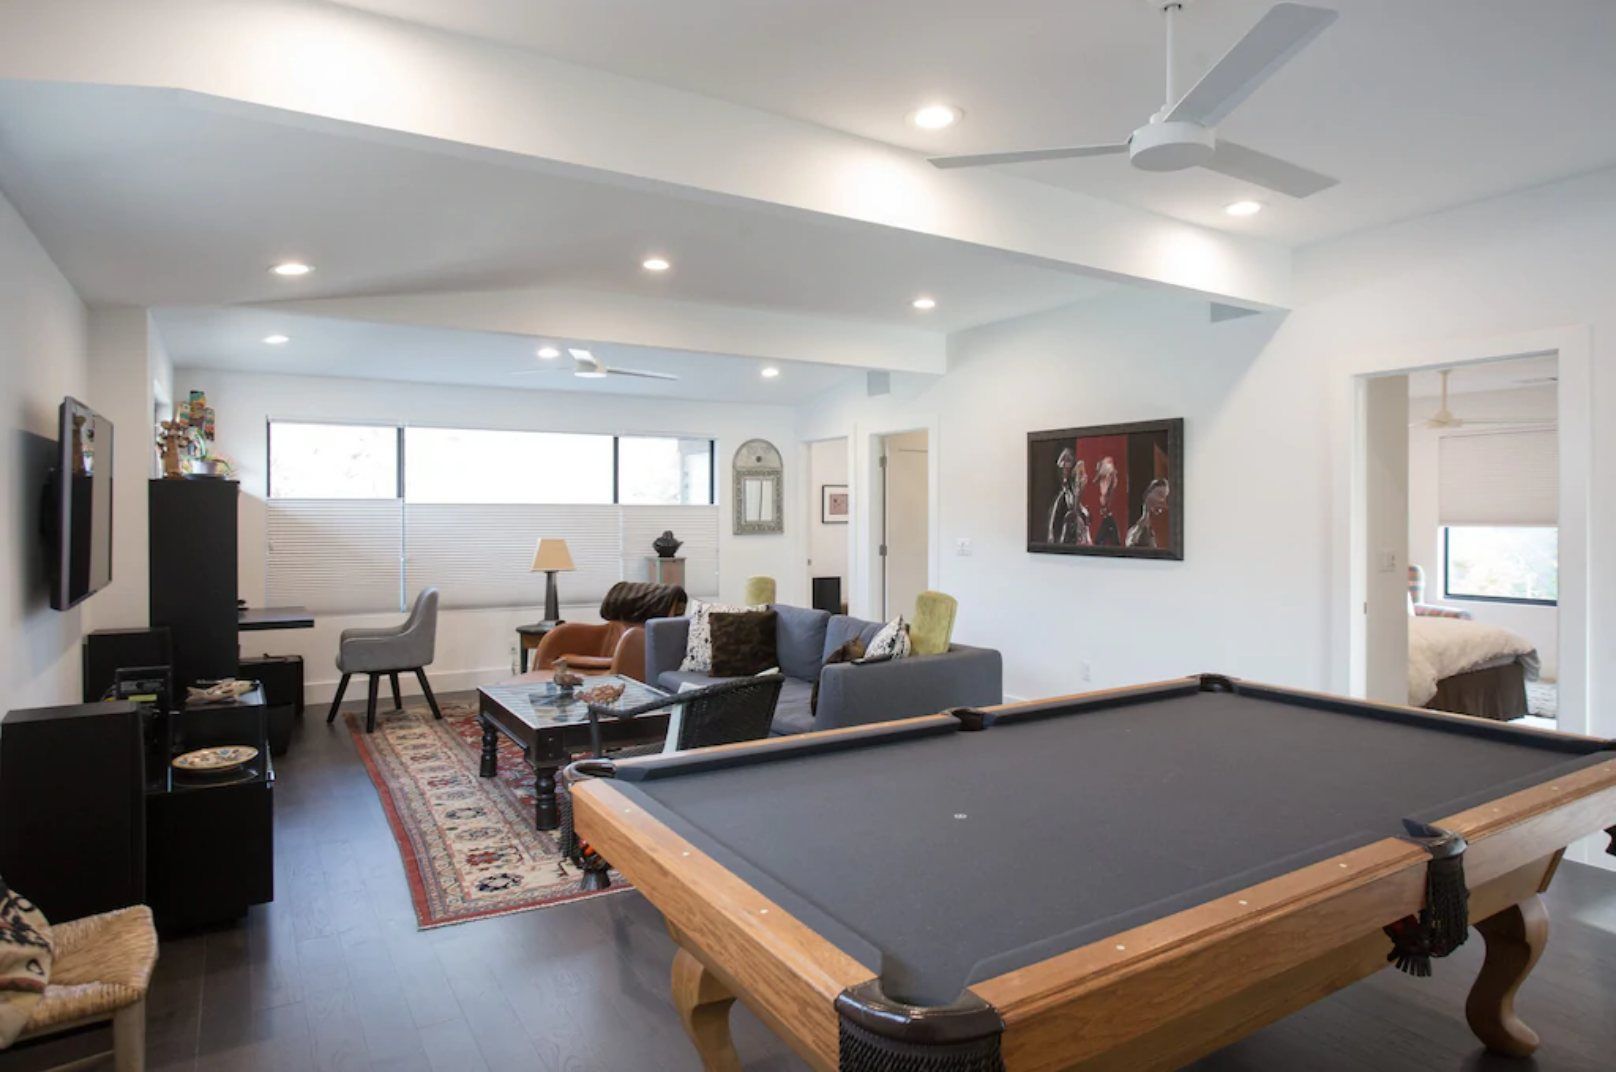 The Coolest Downtown Austin Vacation Rentals